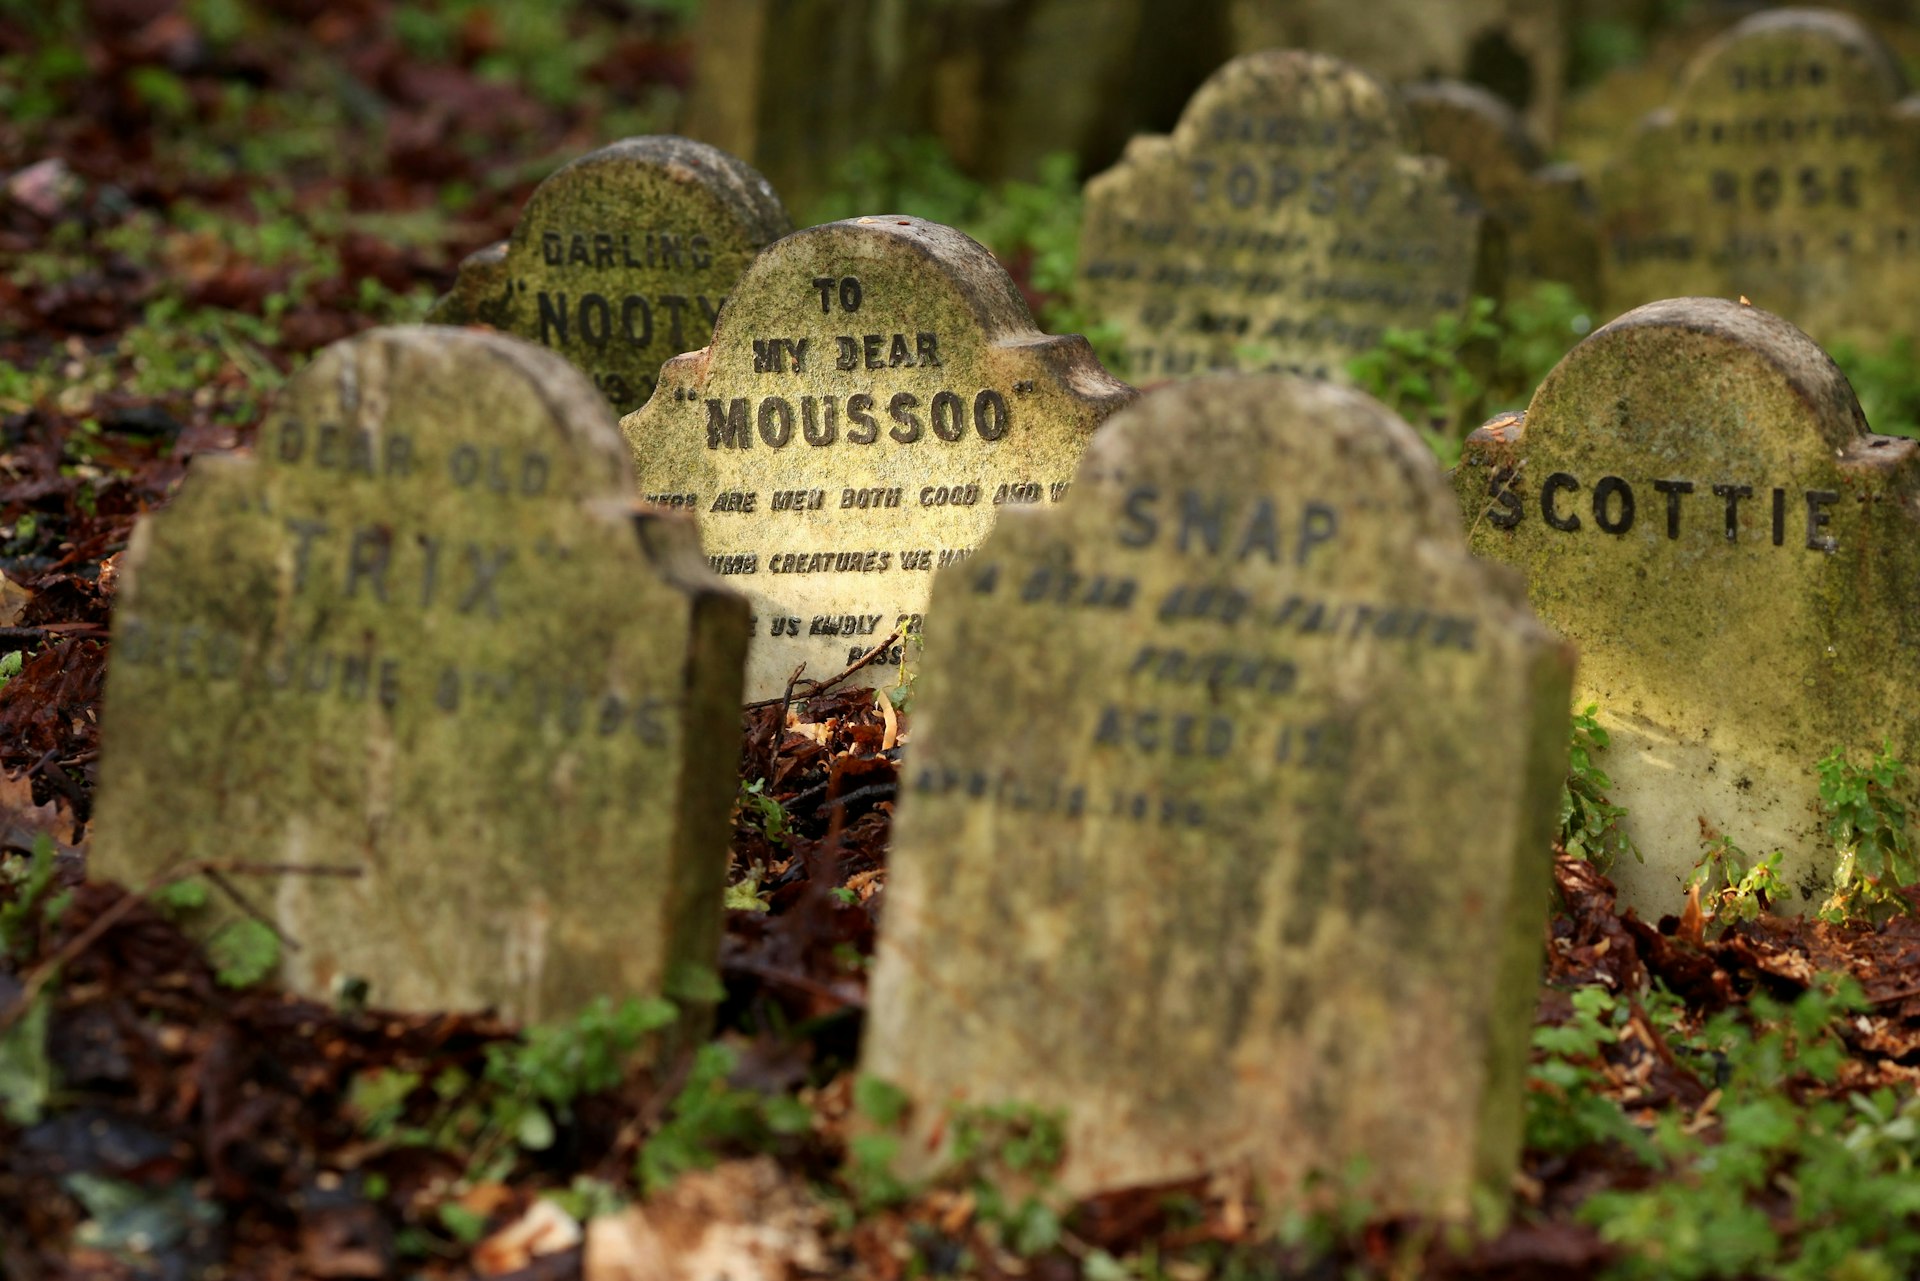 A headstone lit up by natural light reads 'To my dear Moussoo'